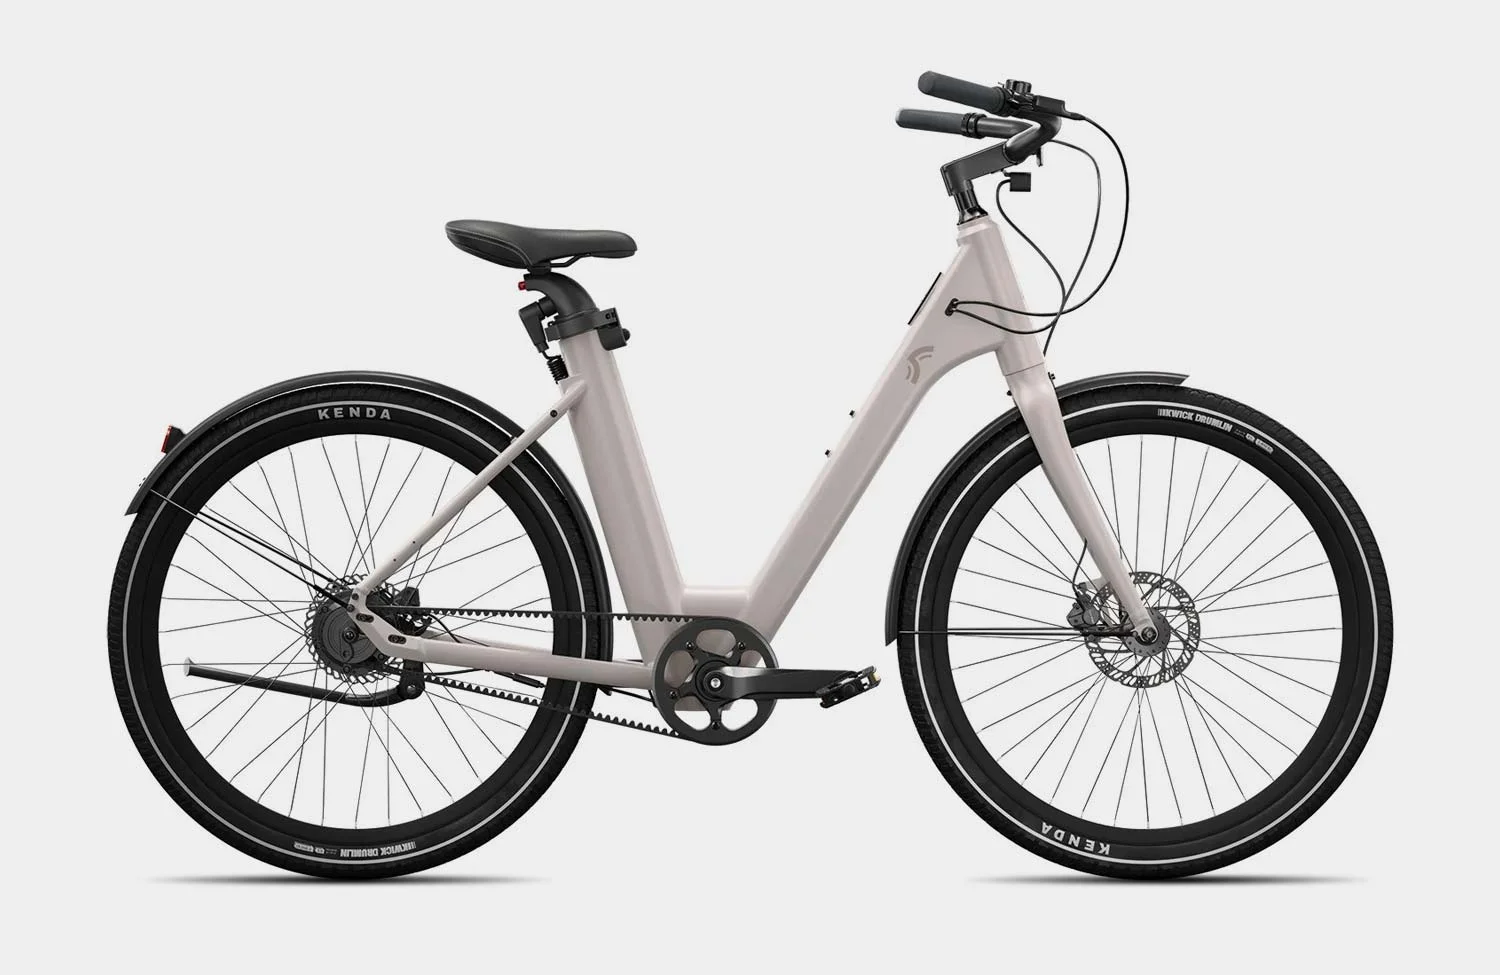 sale euros! — On Urban available 1,199 is e-bike Lidl the again: for currently